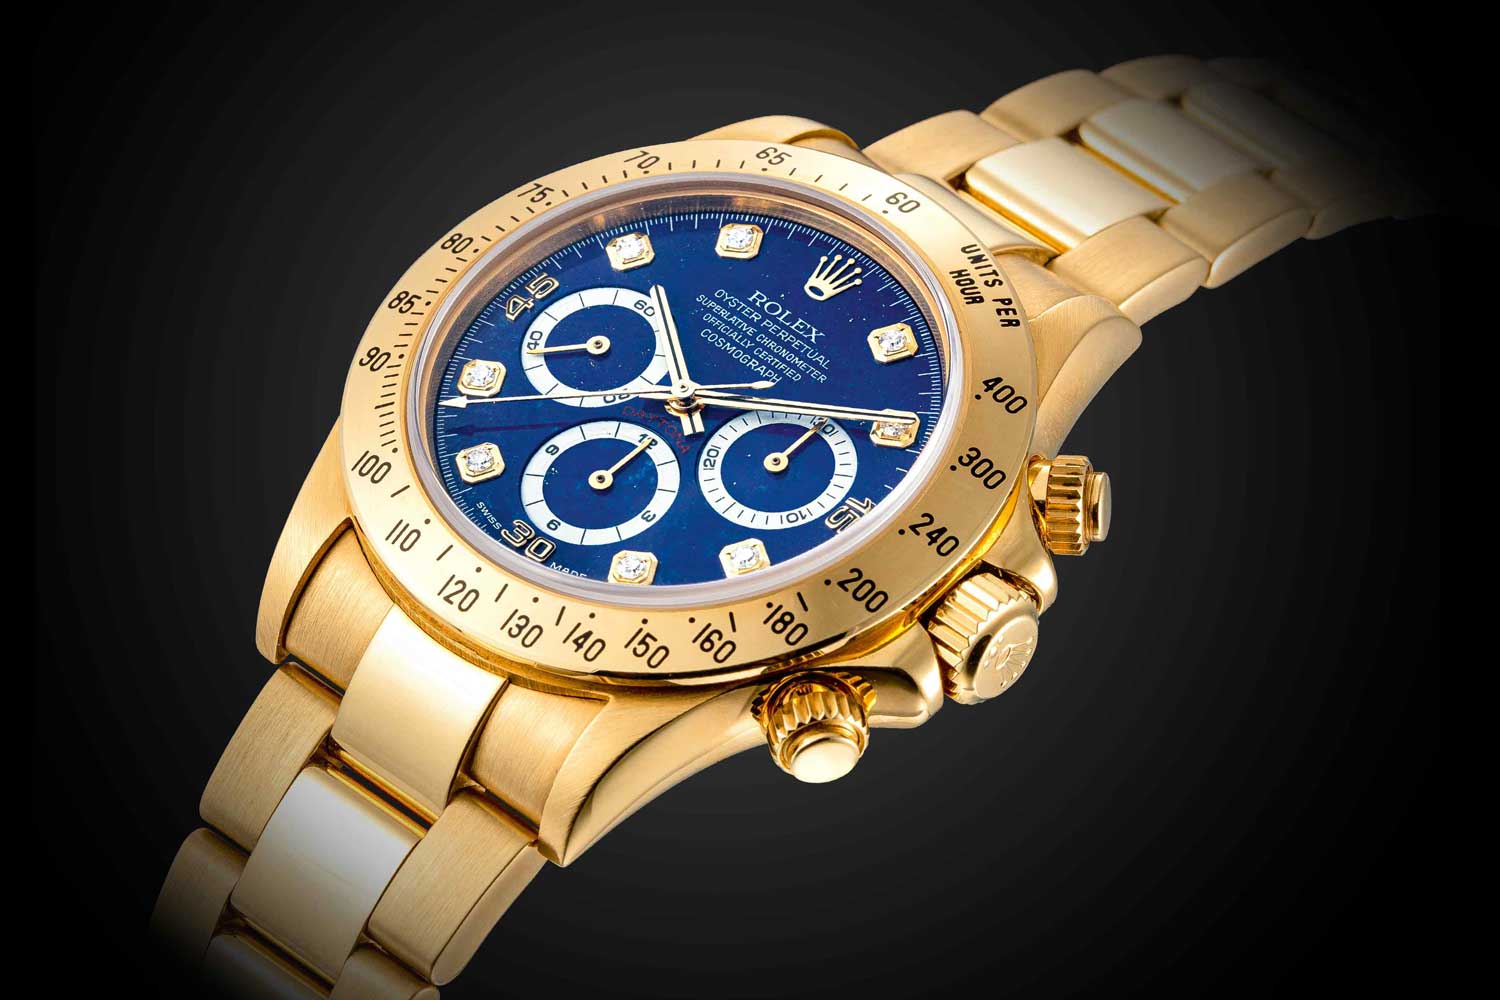 Rolex Daytona reference 16528 in yellow gold with a Lapis Lazuli dial, up for sale with Sotheby’s Autumn 2020 sale in Hong Kong